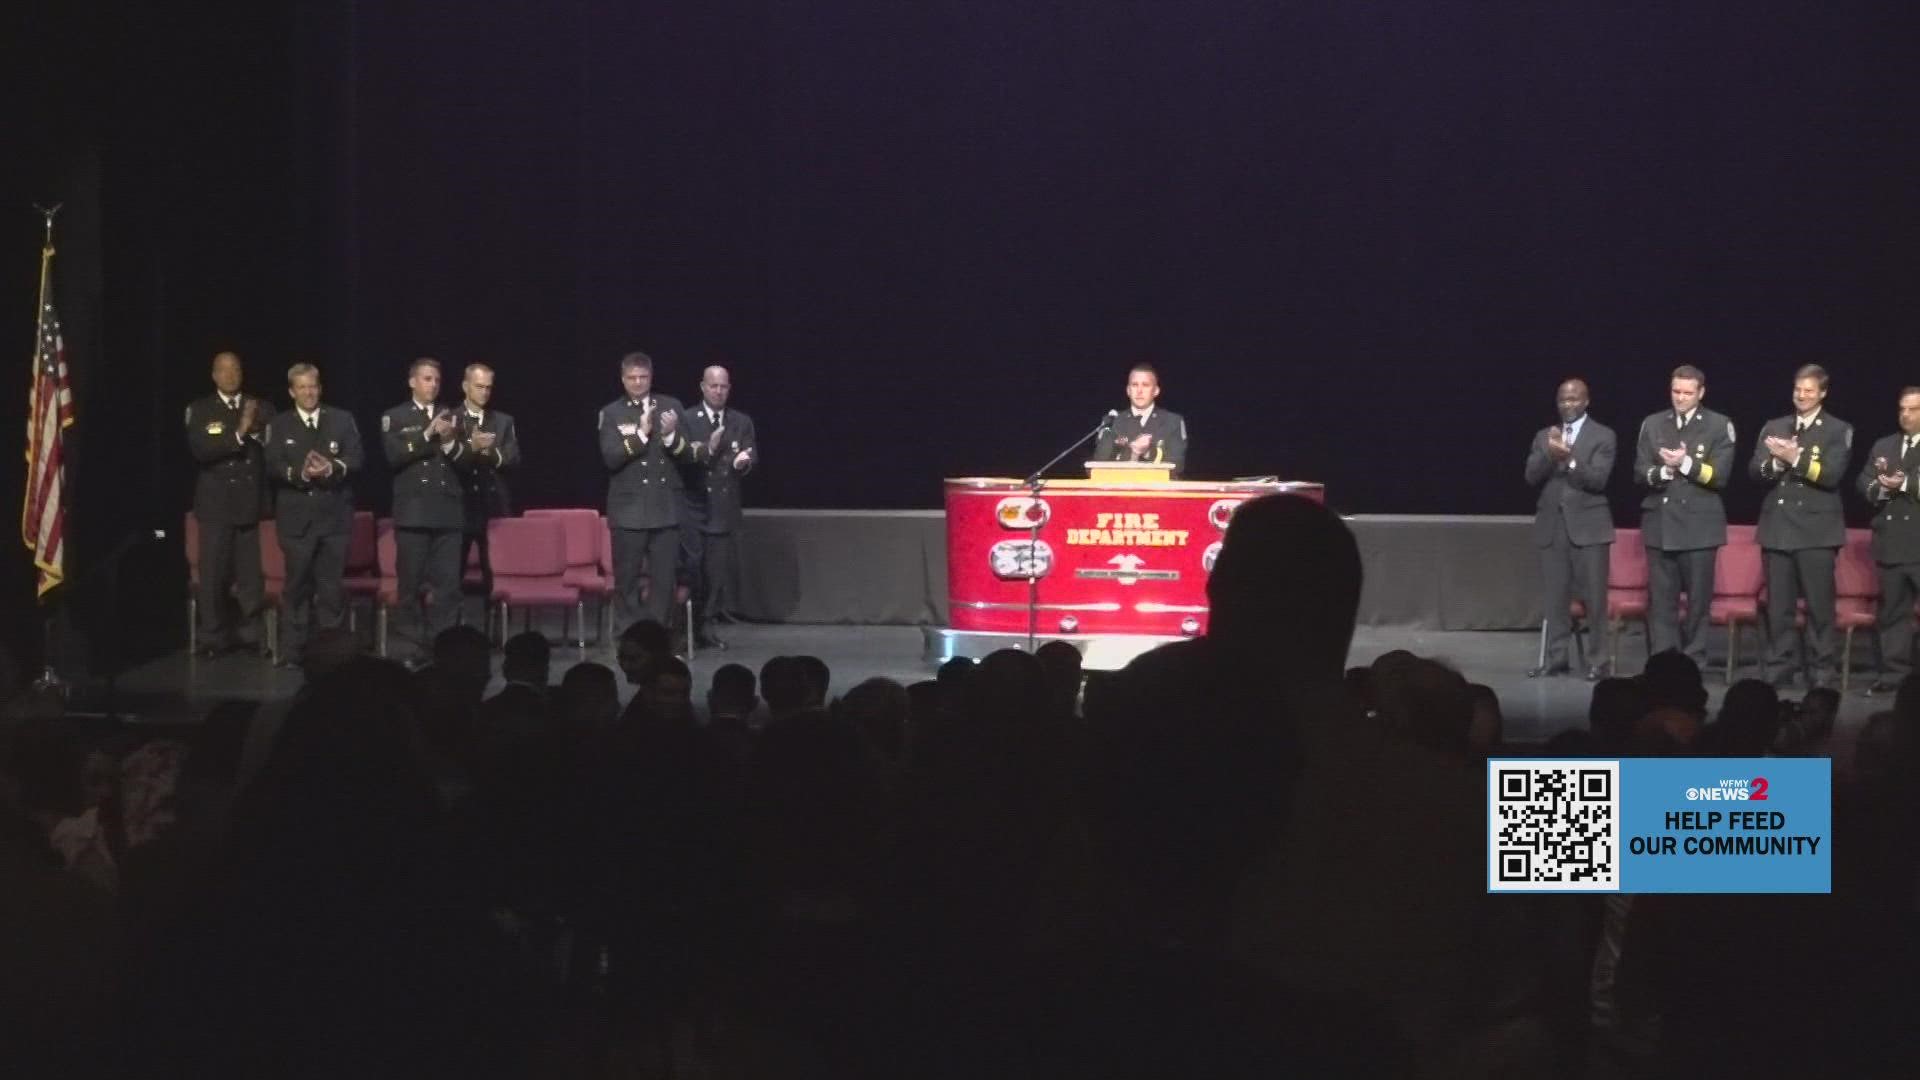 The Greensboro Fire Department held a graduation ceremony for 22 new recruits.